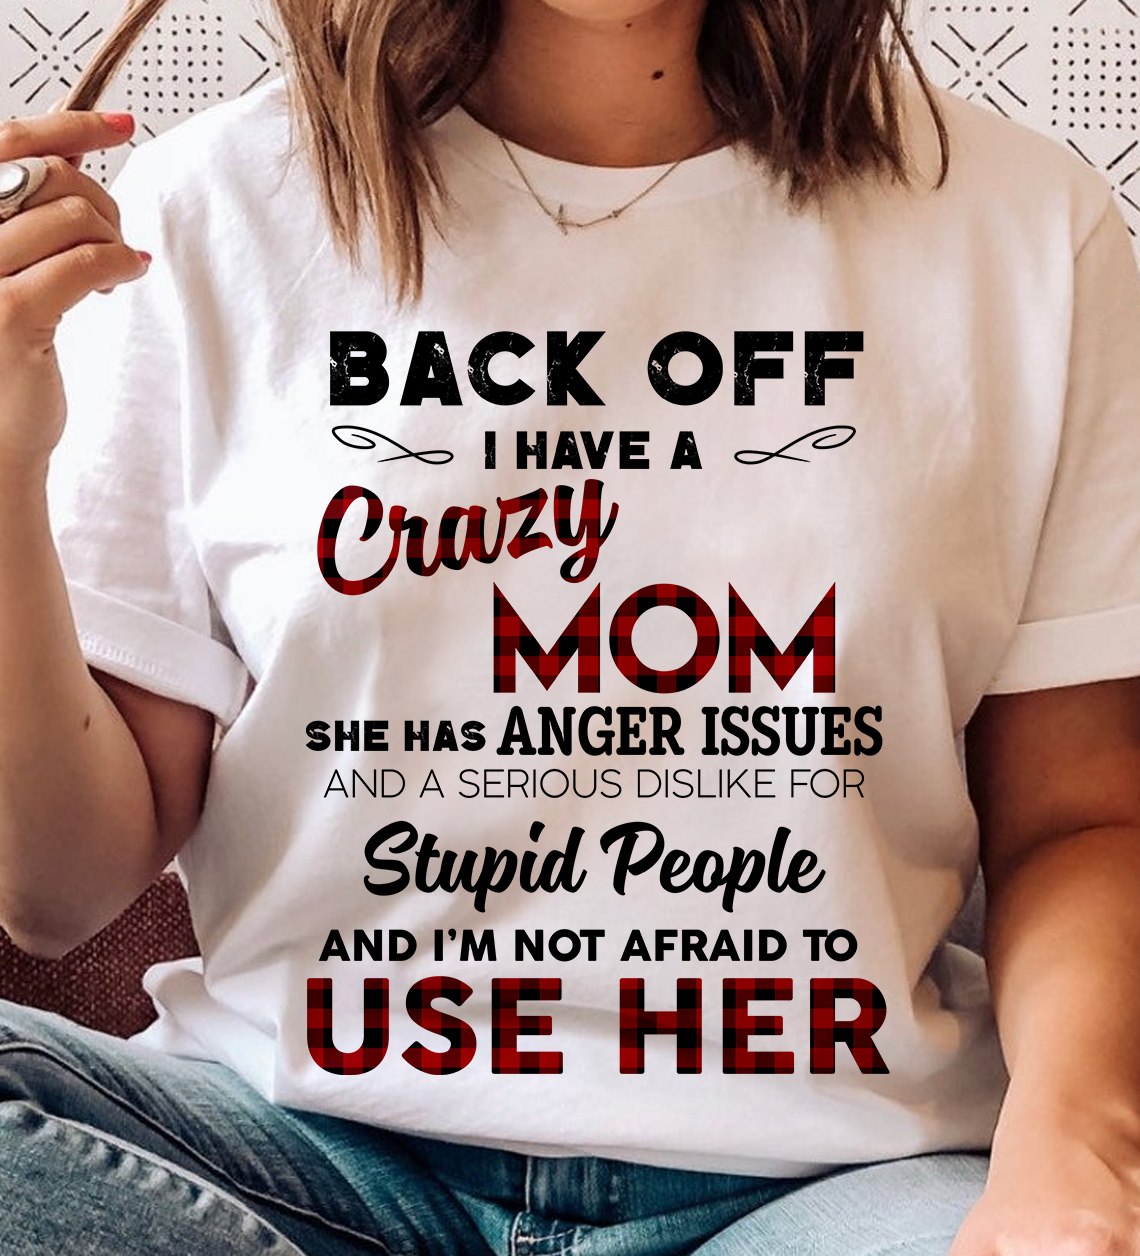 Back-off-I-have-a-crazy-mom-she-has-anger-issues.jpg